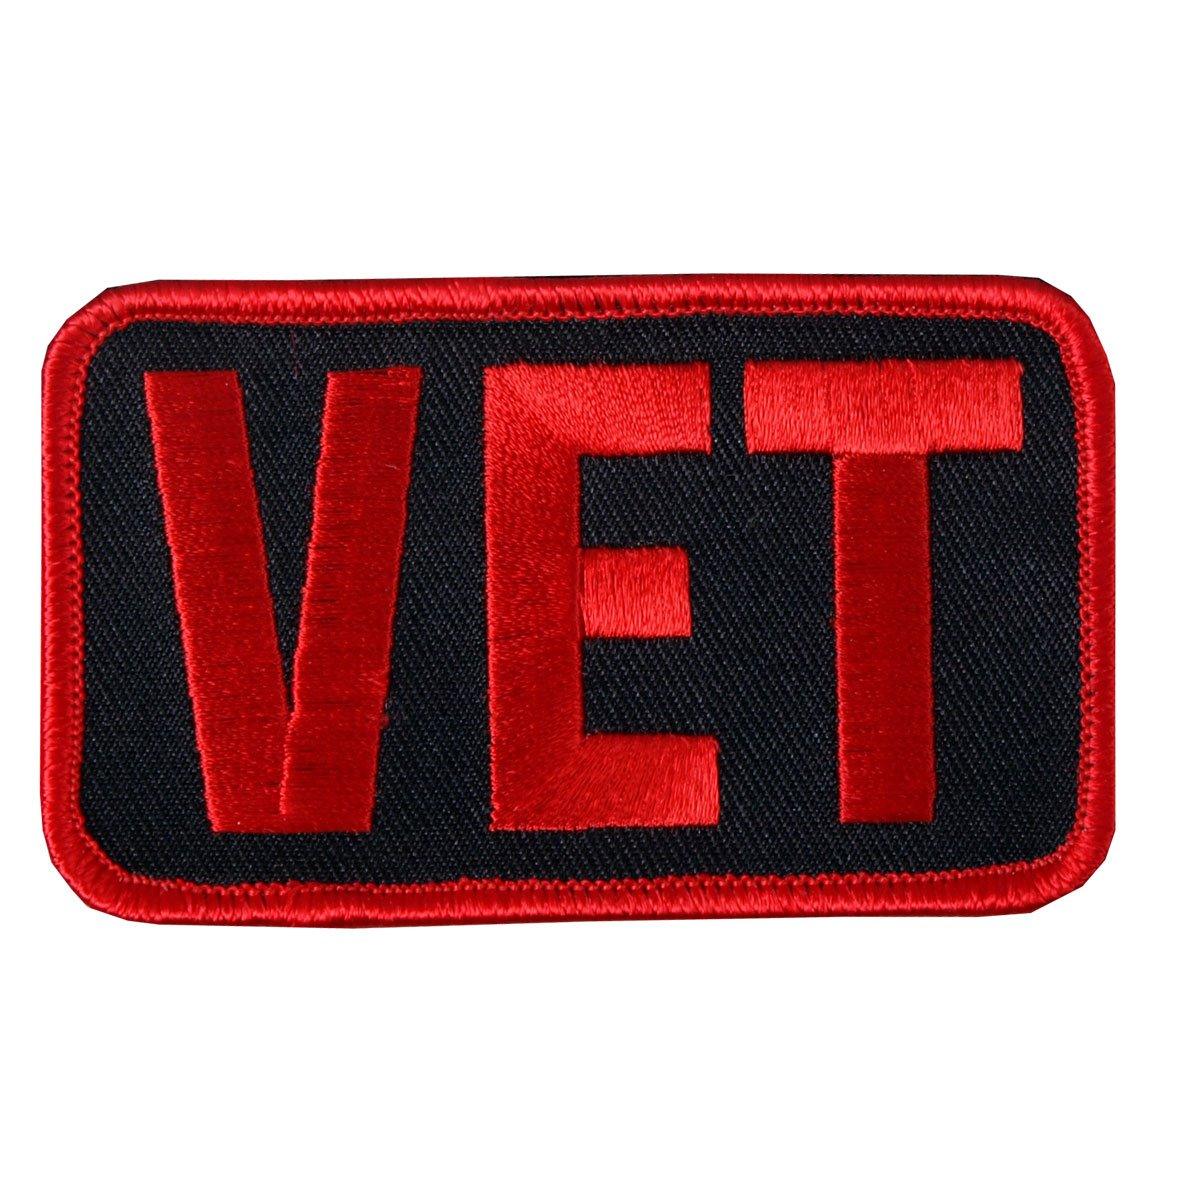 Hot Leathers Vet Patch - American Legend Rider